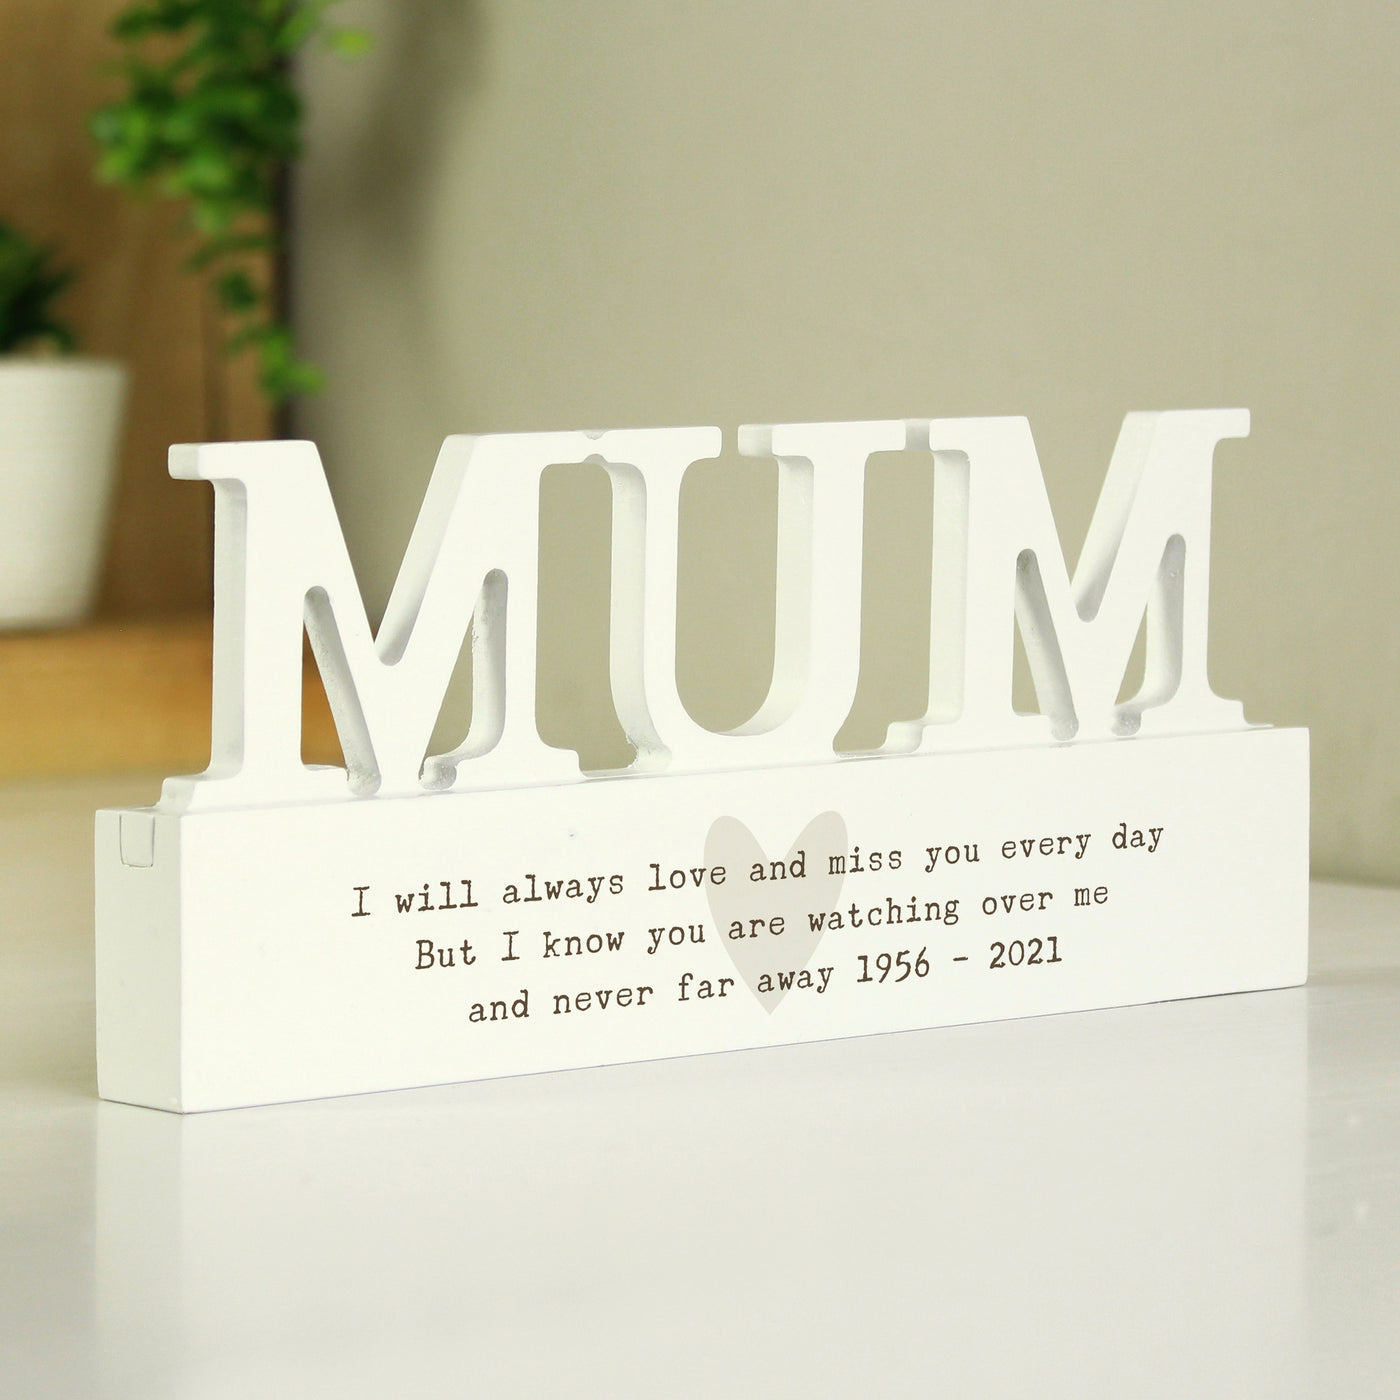 Personalised Free Text Heart Wooden Mum Ornament